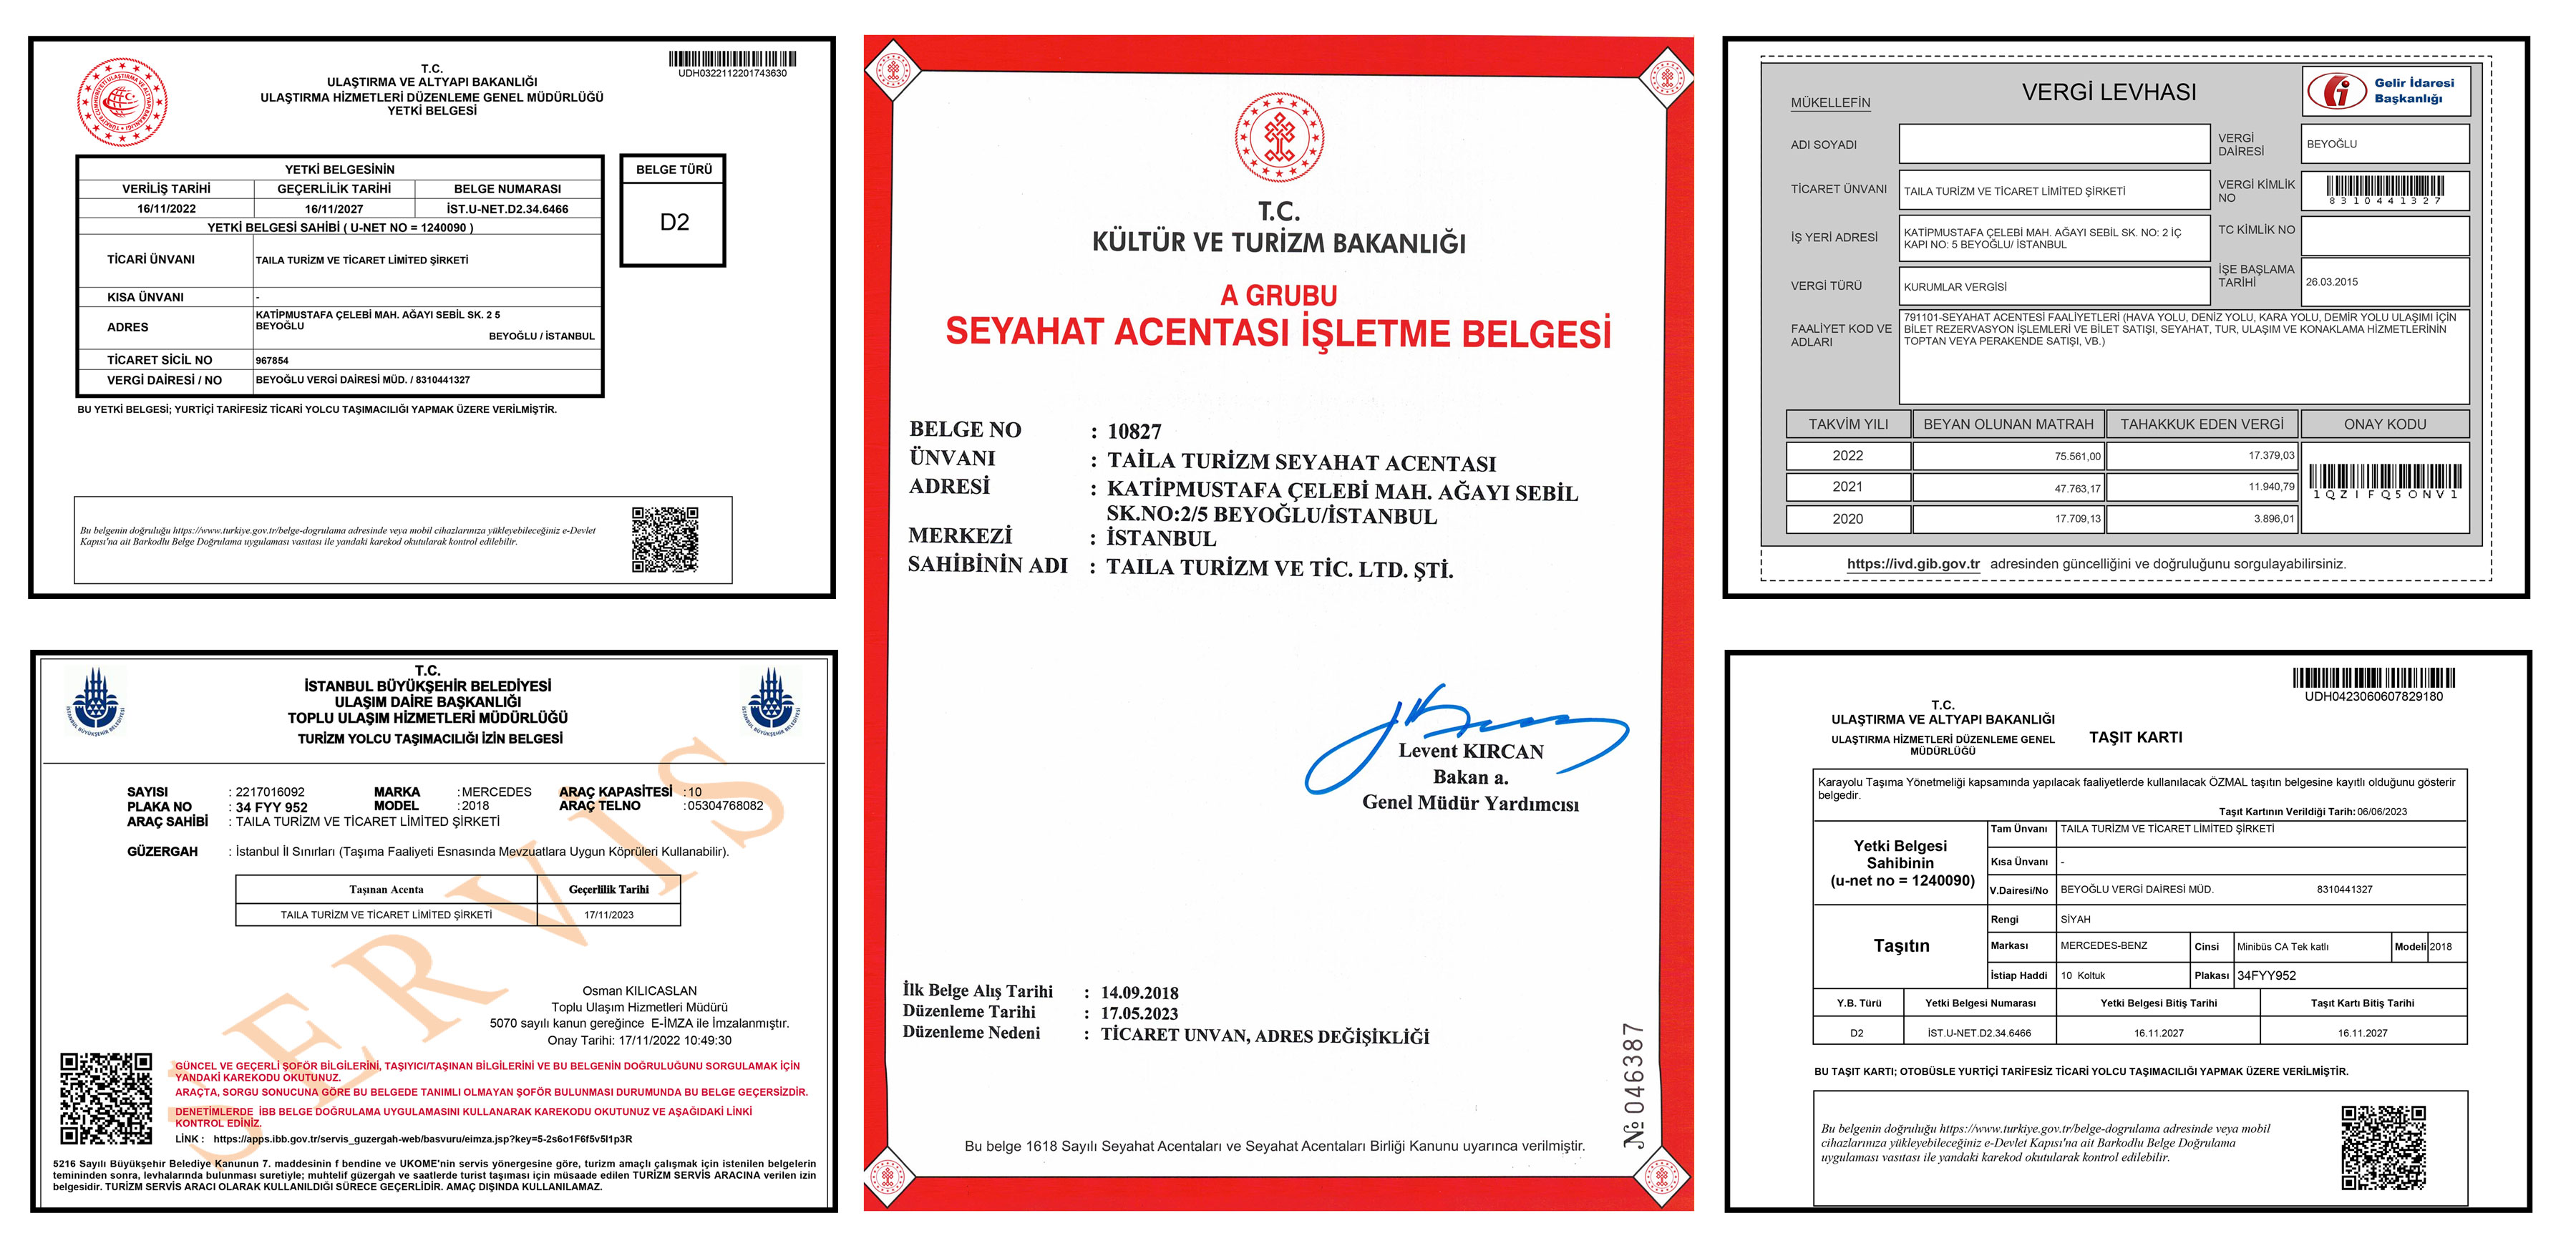 Rento Istanbul Airport Transfer Certificate